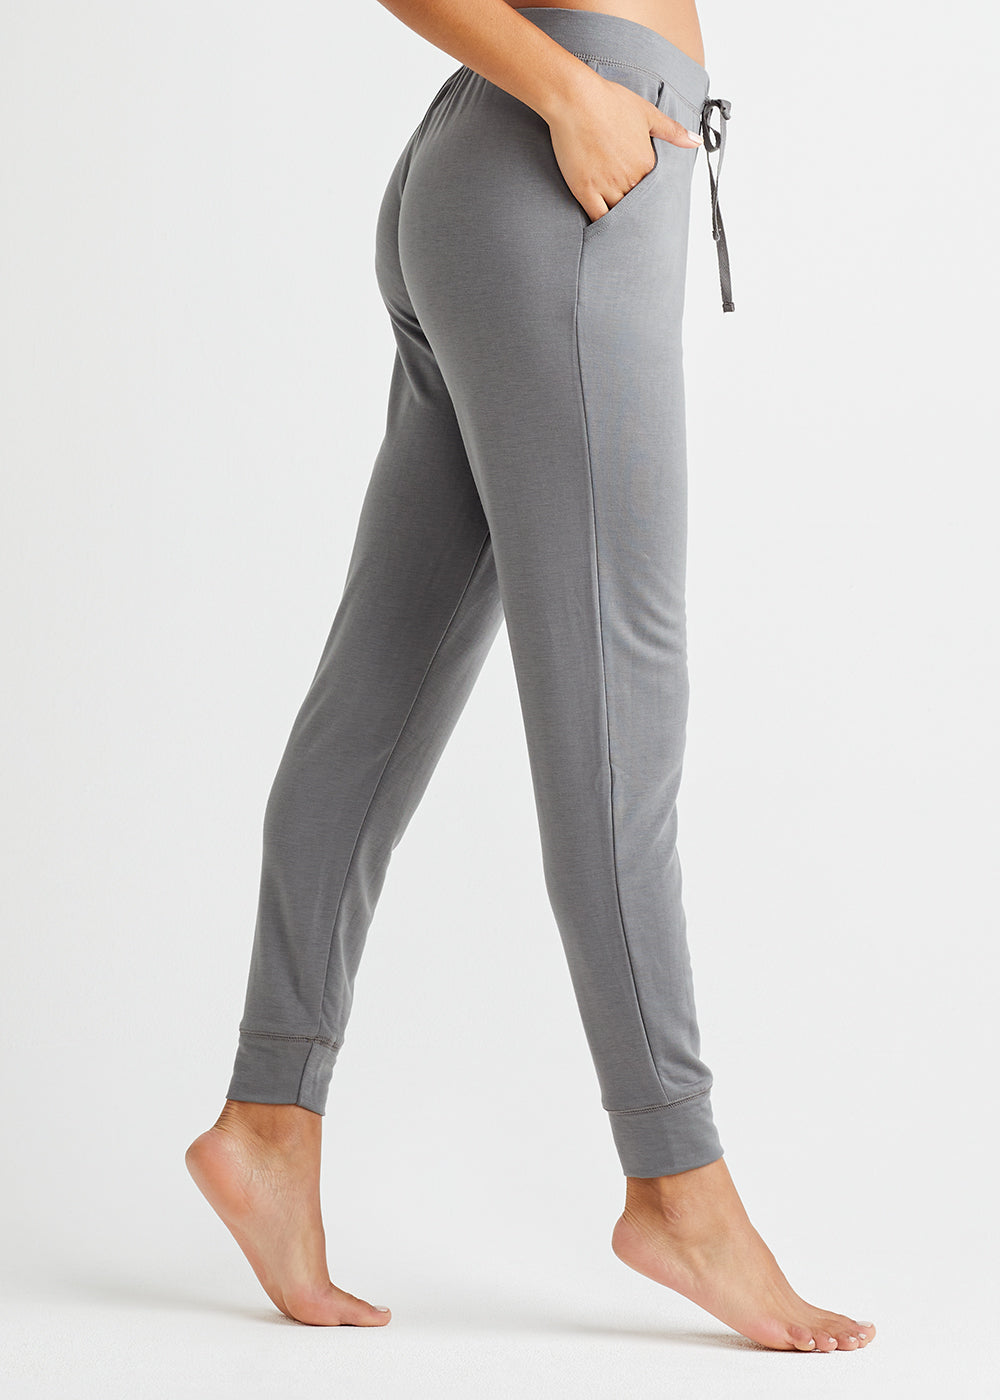 slim leg lounge jogger - baby french terry in Gargoyle with Pockets worn by a woman standing sideways Yummie